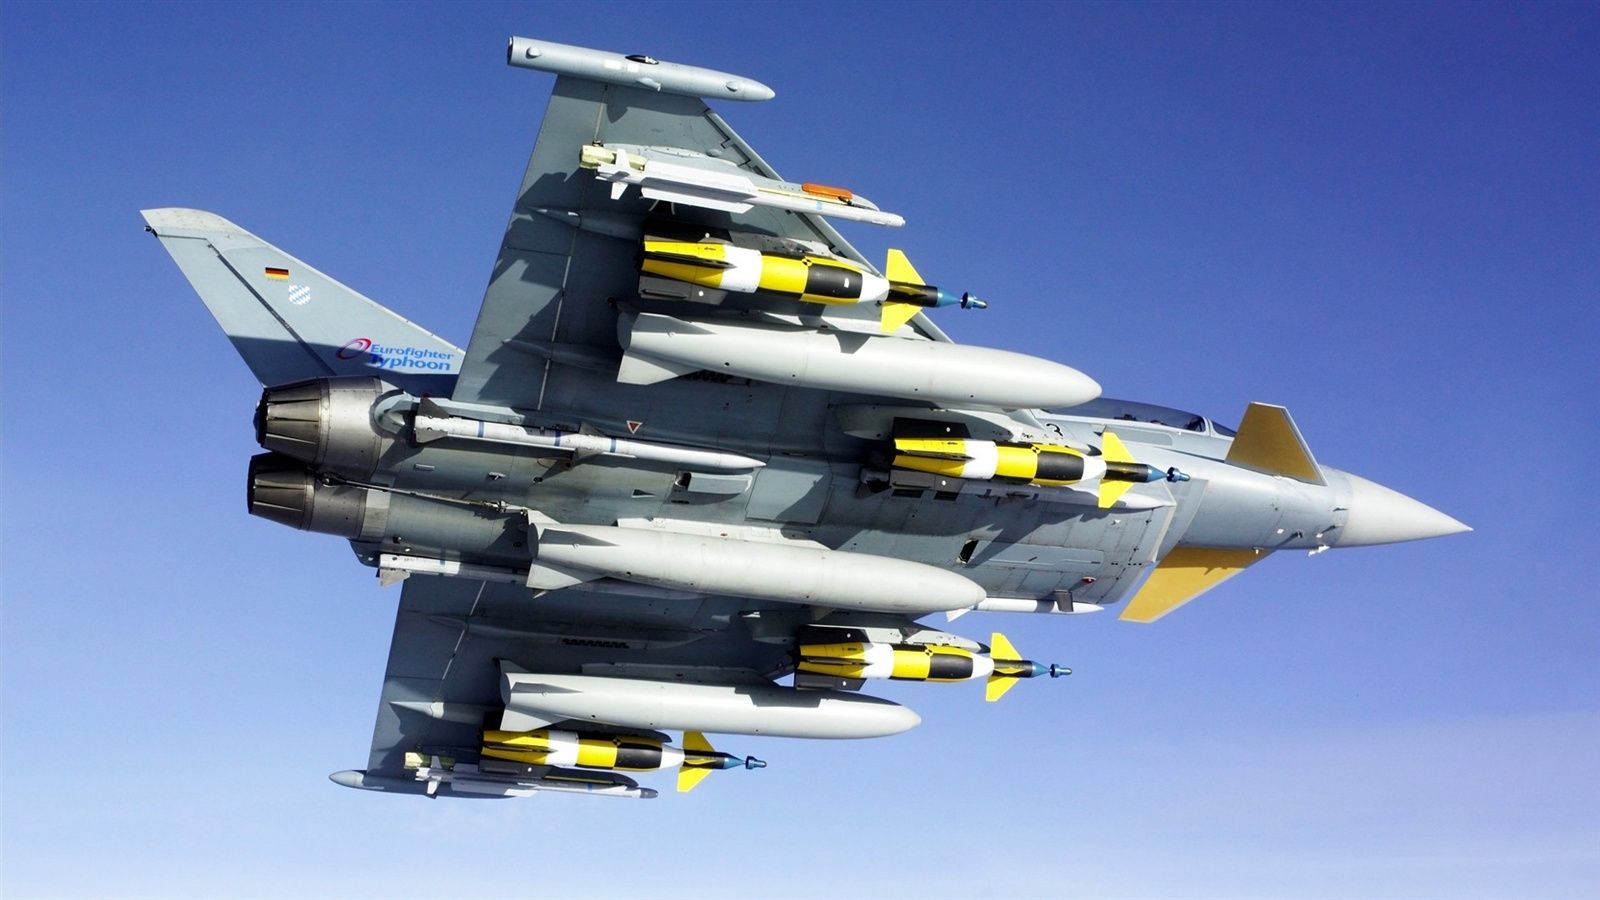 Wallpaper Fighter aircraft armed with missiles bottom view